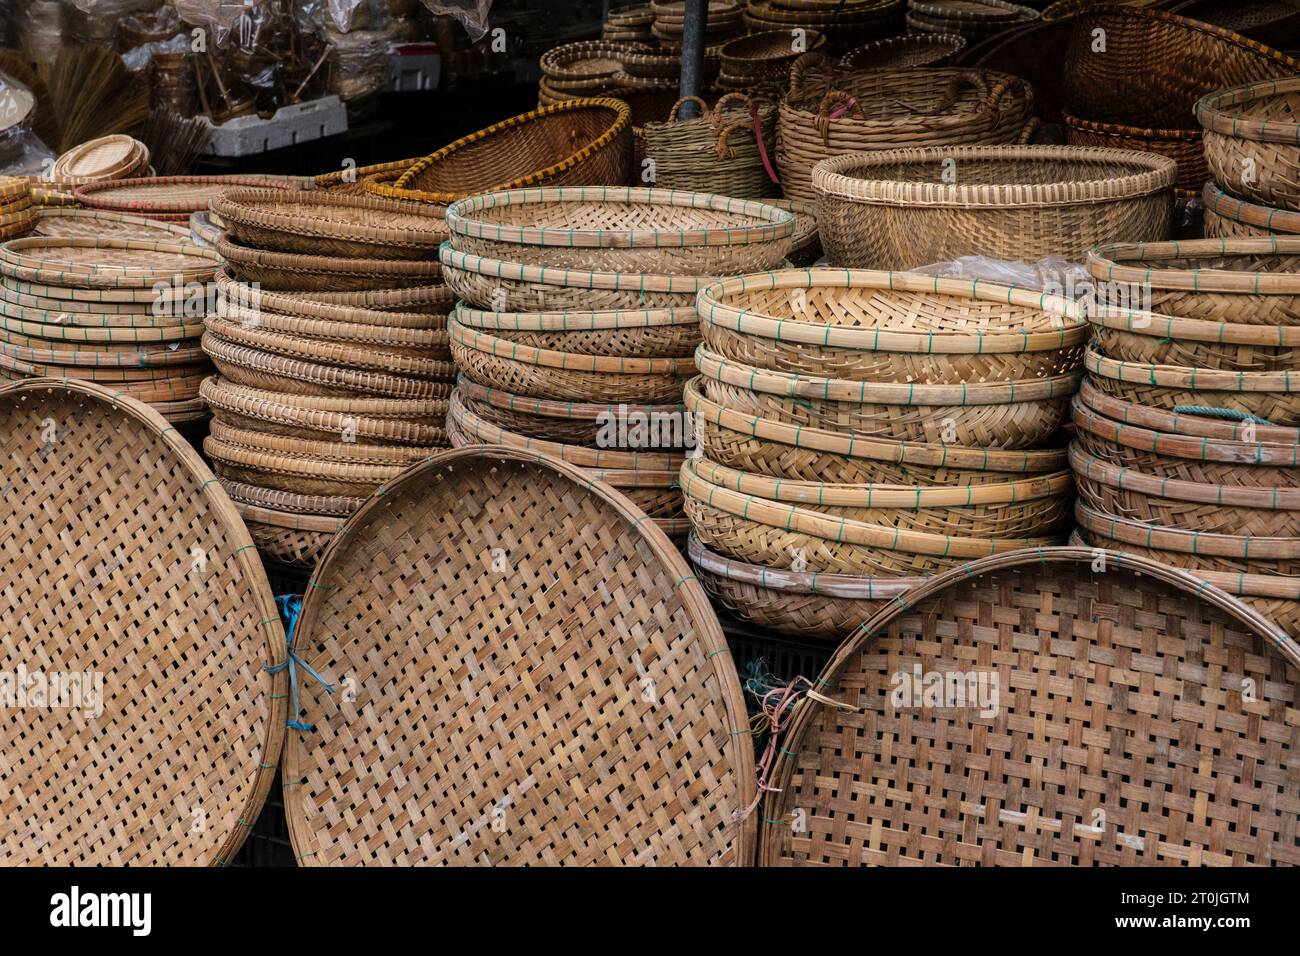 Hoi An, Vietnam. Baskets and Trays for Sale in the Market. Stock Photo